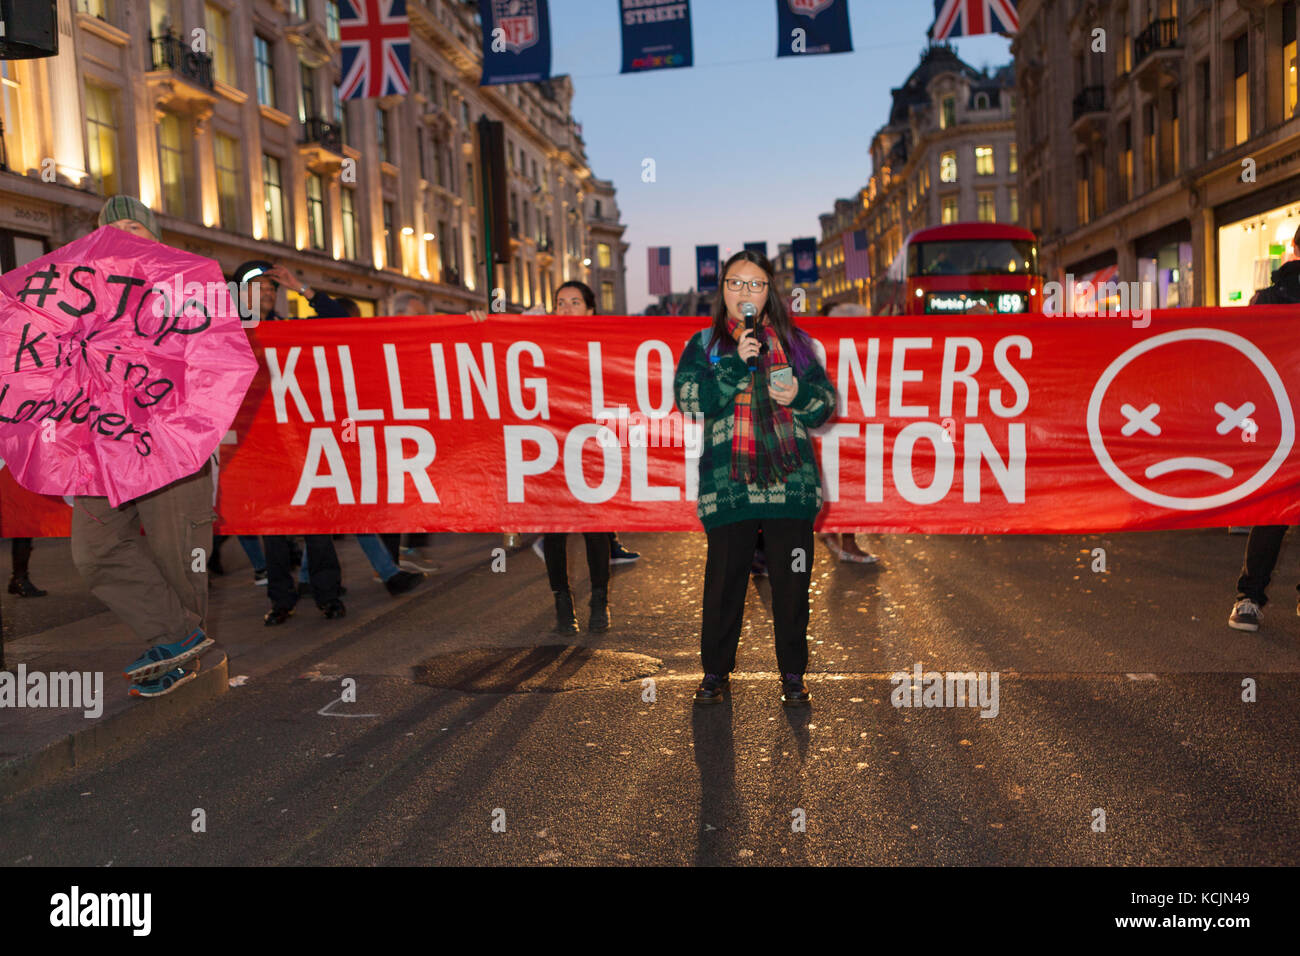 London, UK. 5th Oct, 2017. Stop Killing Londoners Protest: Oxford Circus, London UK. 5th October, 2017. Stop Killing Londoners - Campaigners stage 10 minute road block in Oxford Circus to demand urgent action on pollution on London’s roads. Part of an ongoing campaign of peaceful protests calling on Mayor Sadiq Khan to take decisive action against the dangerous levels of pollution, which causes thousands of deaths each year. Credit: Steve Parkins/Alamy Live News Stock Photo